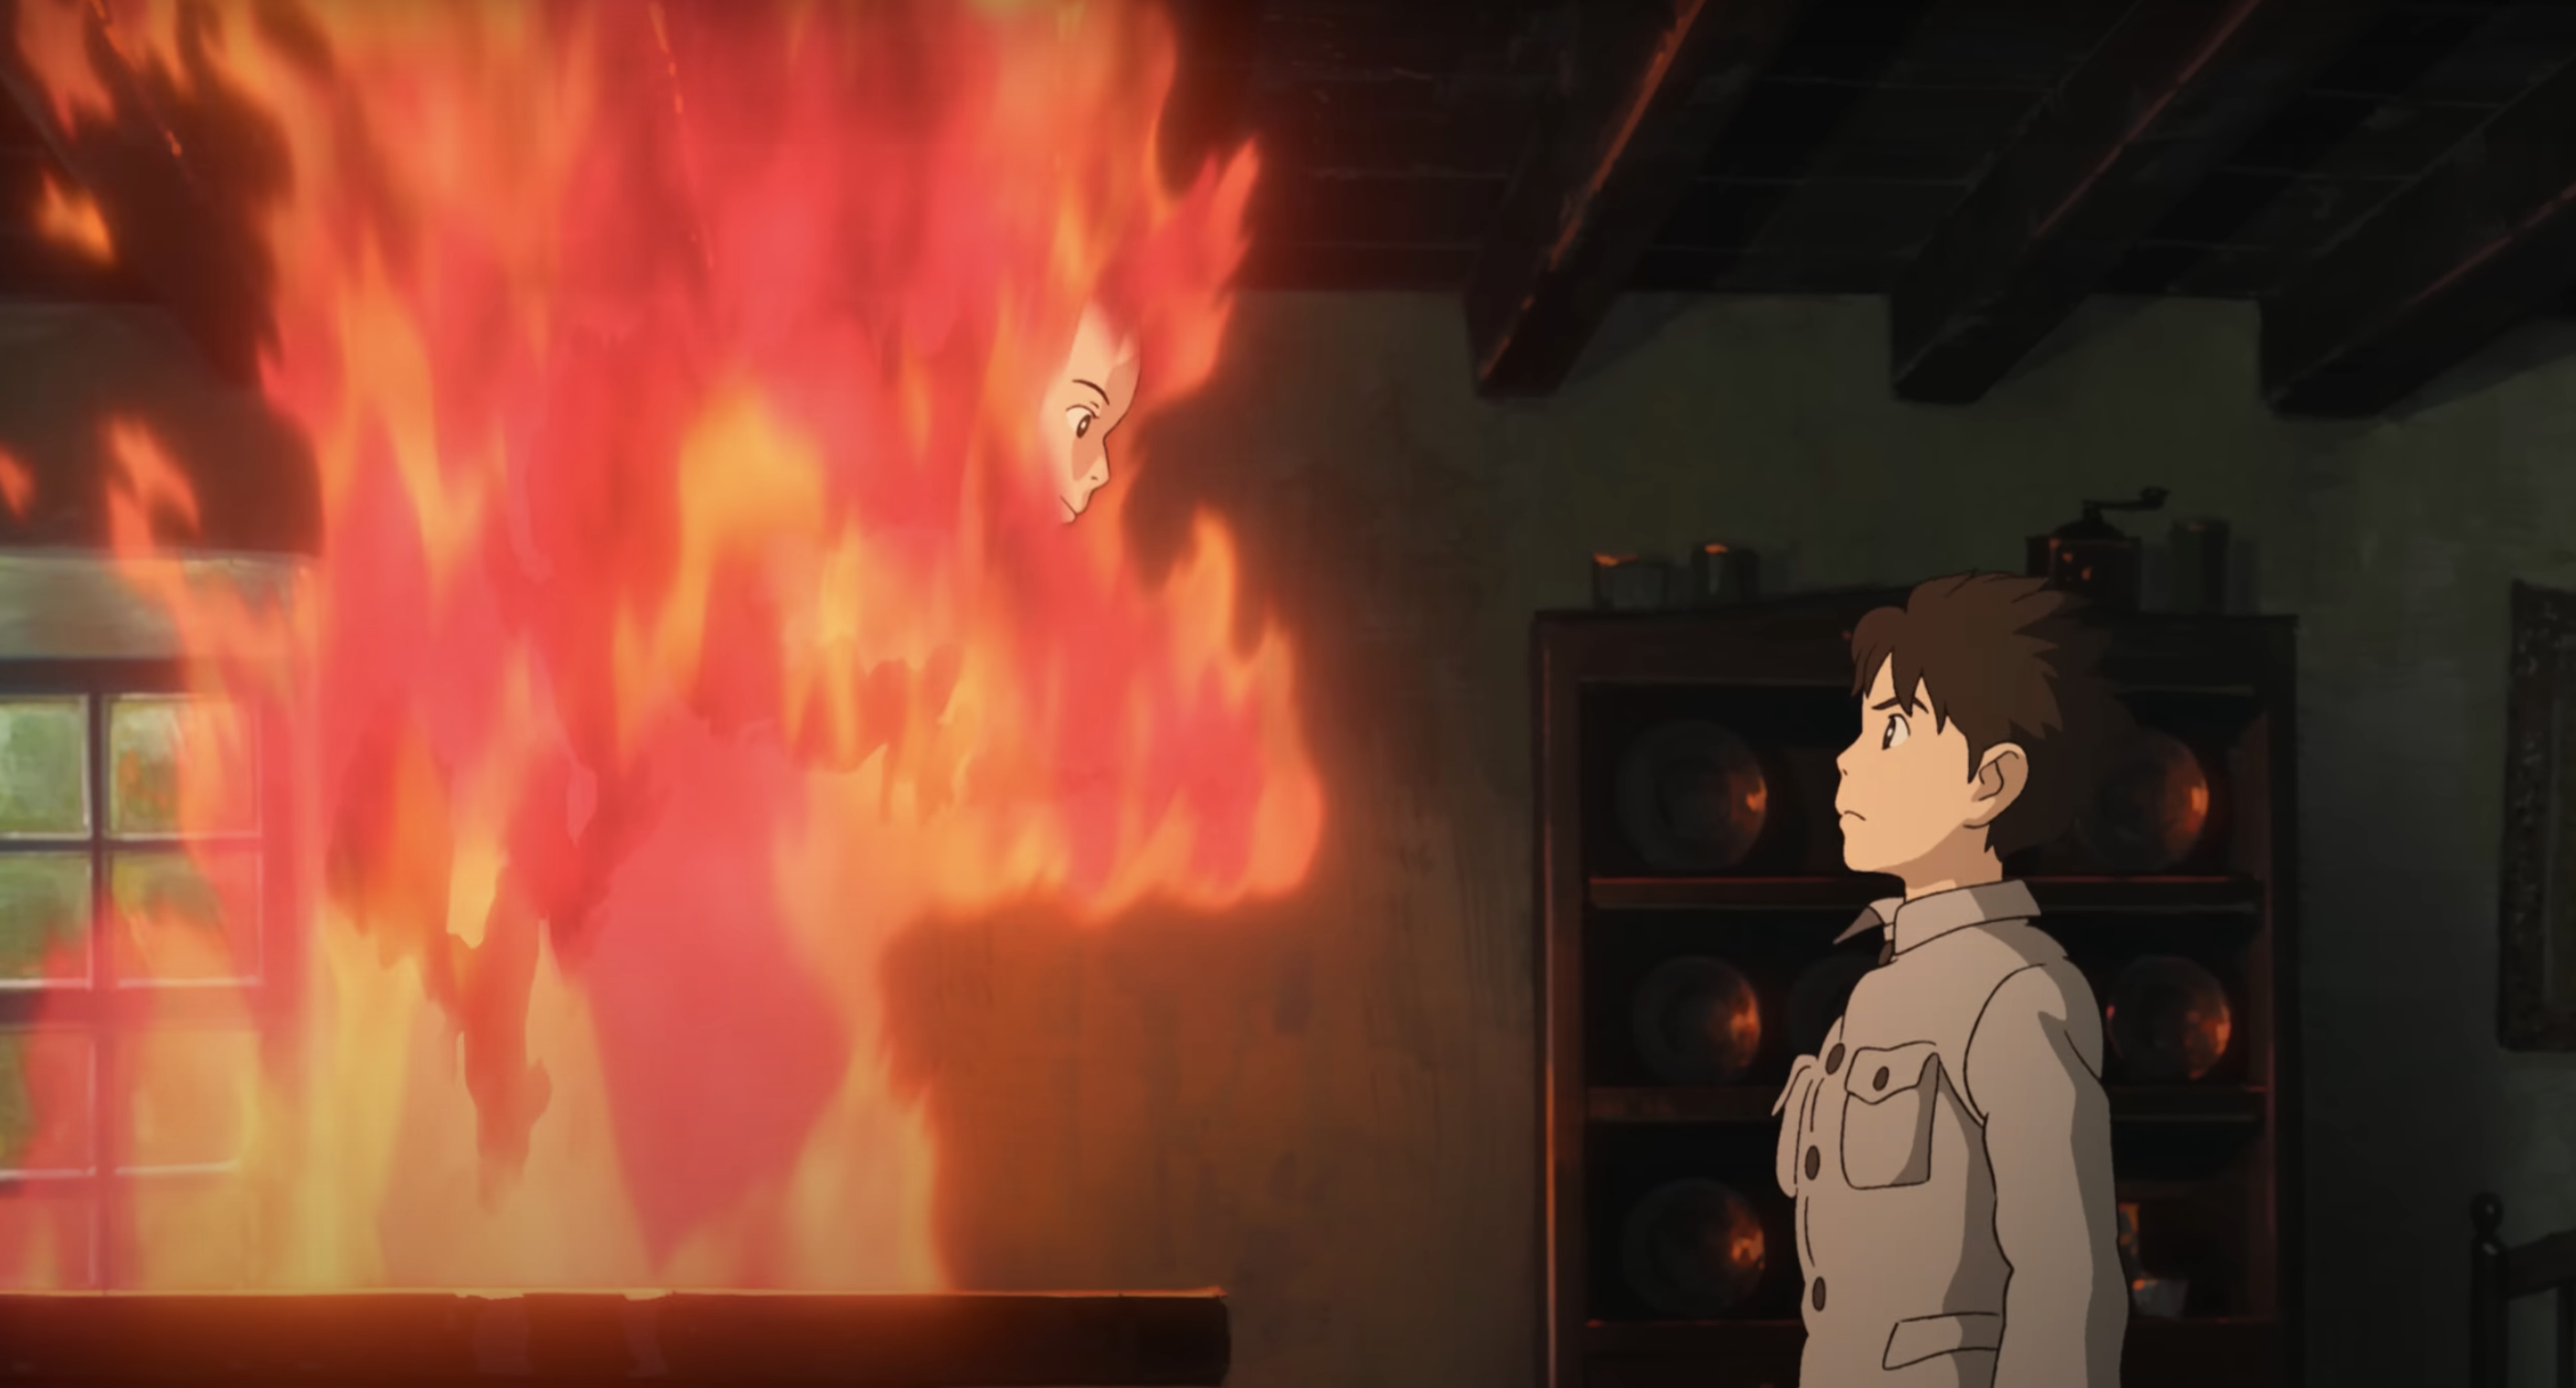 boy in a uniform standing in front of a person made of flames